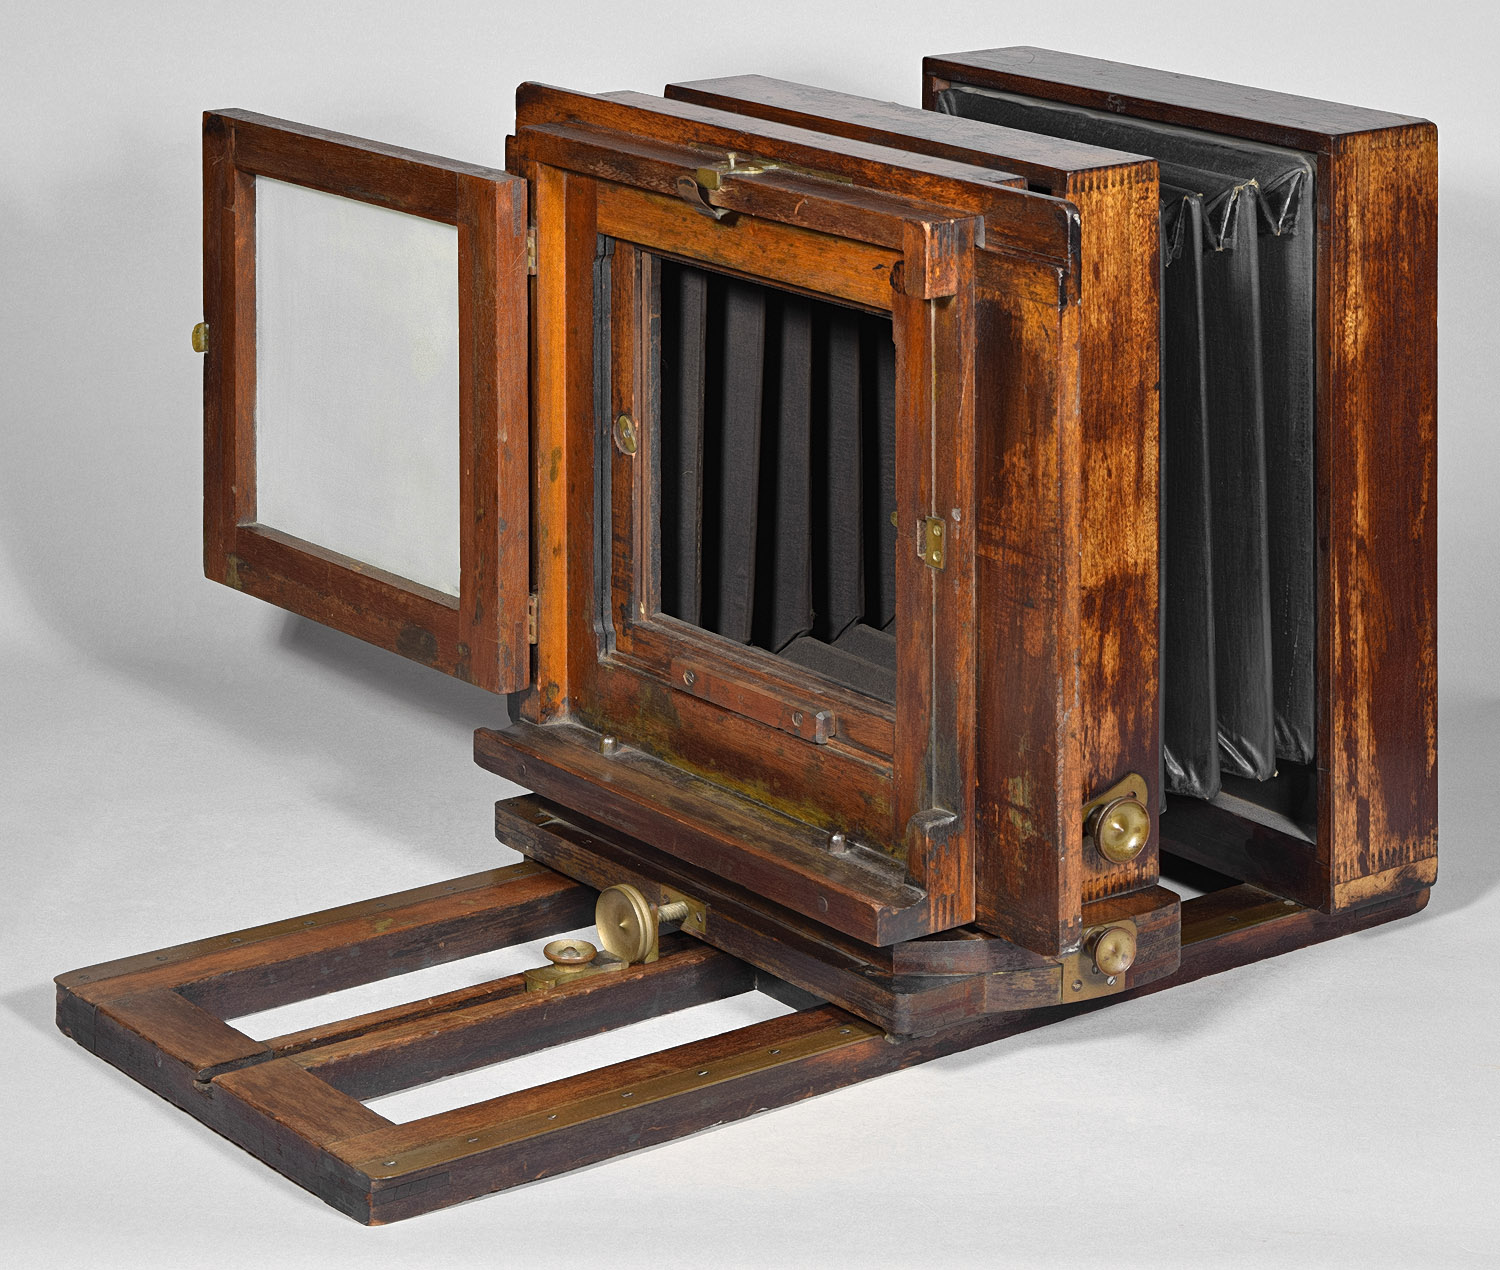 1240-American.Optical.Imperial.Cabinet.Camera-10x10-f-single.lens.gg.open-1500.jpg